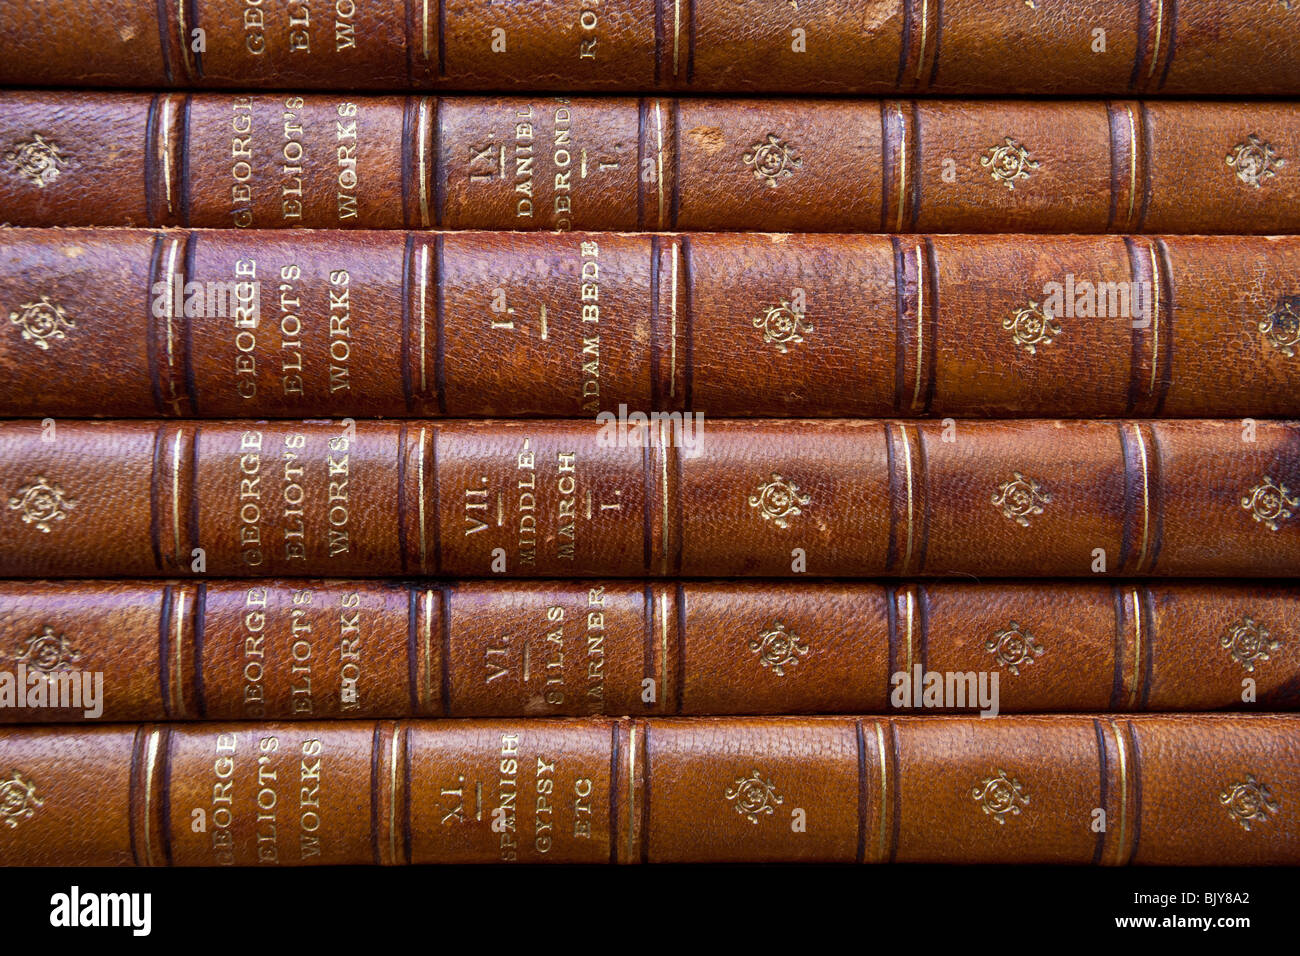 George Eliot books - Leather bound novels by George Eliot Stock Photo